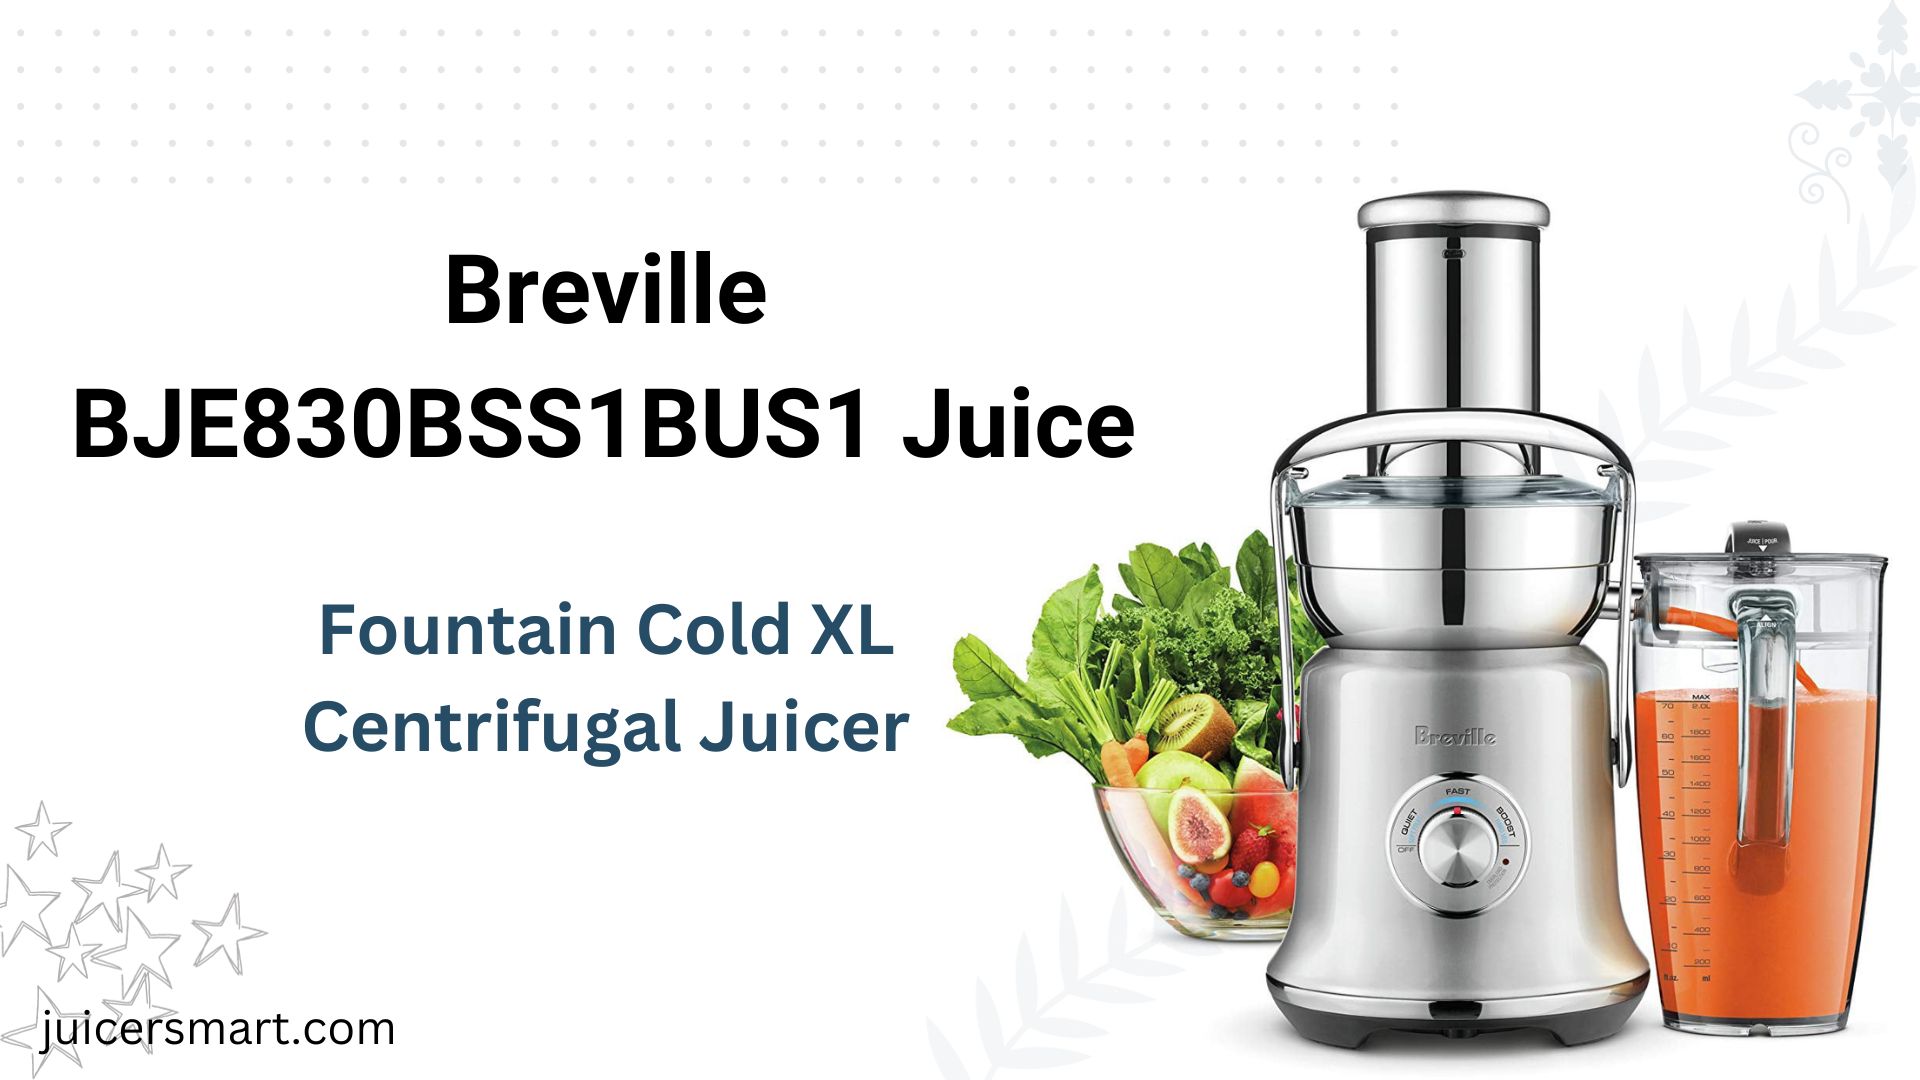 Breville BJE830BSS1BUS1 Juice Fountain Cold XL Centrifugal Juicer